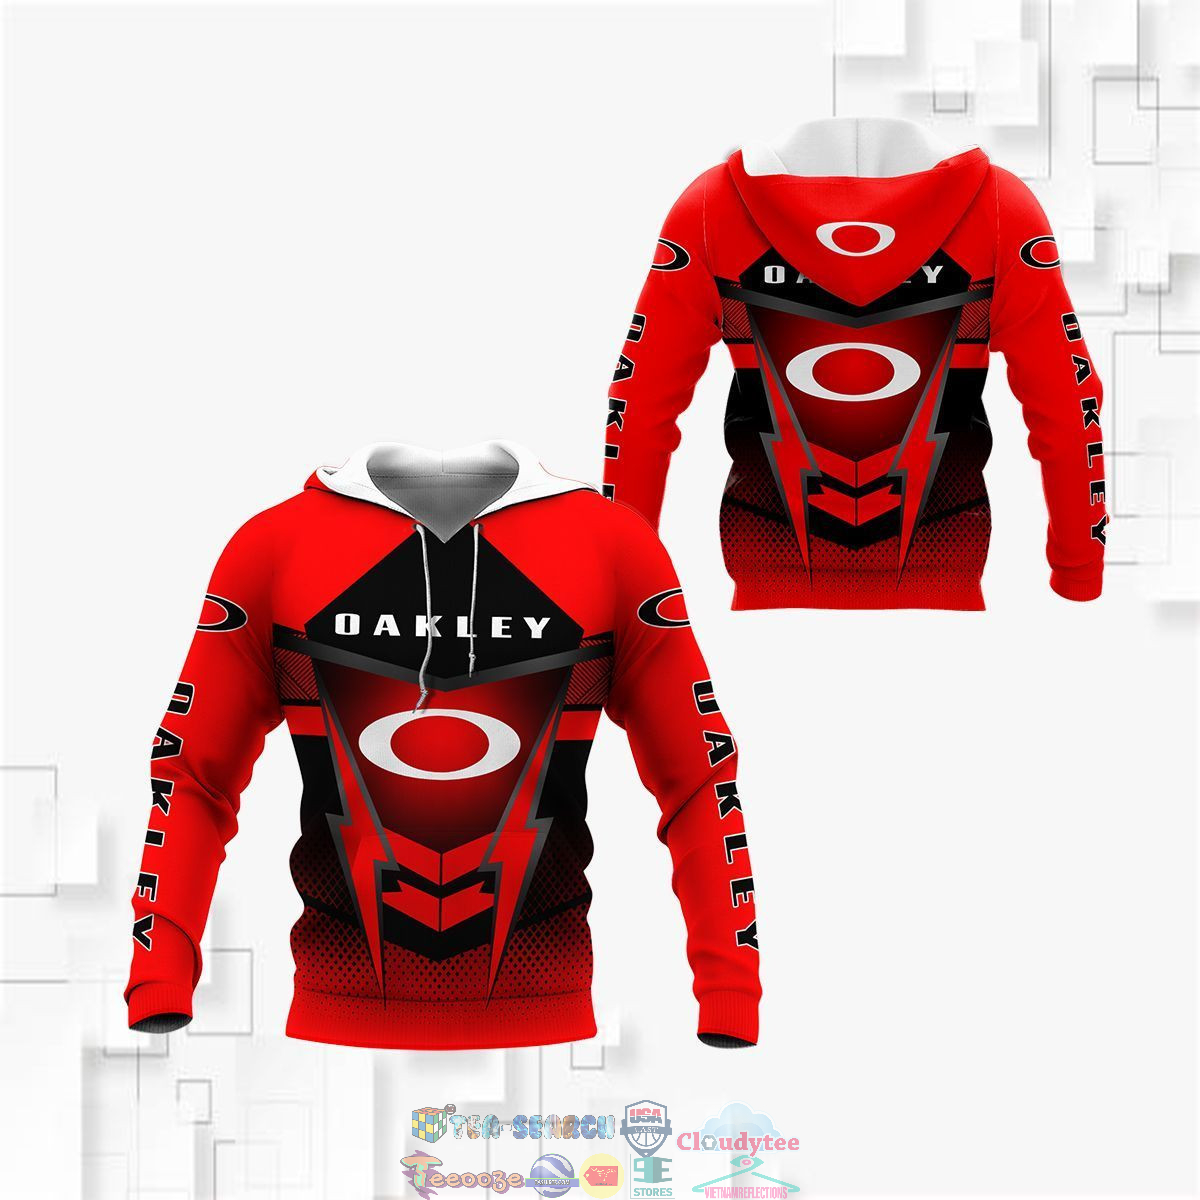 Oakley Red 3D hoodie and t-shirt- Saleoff